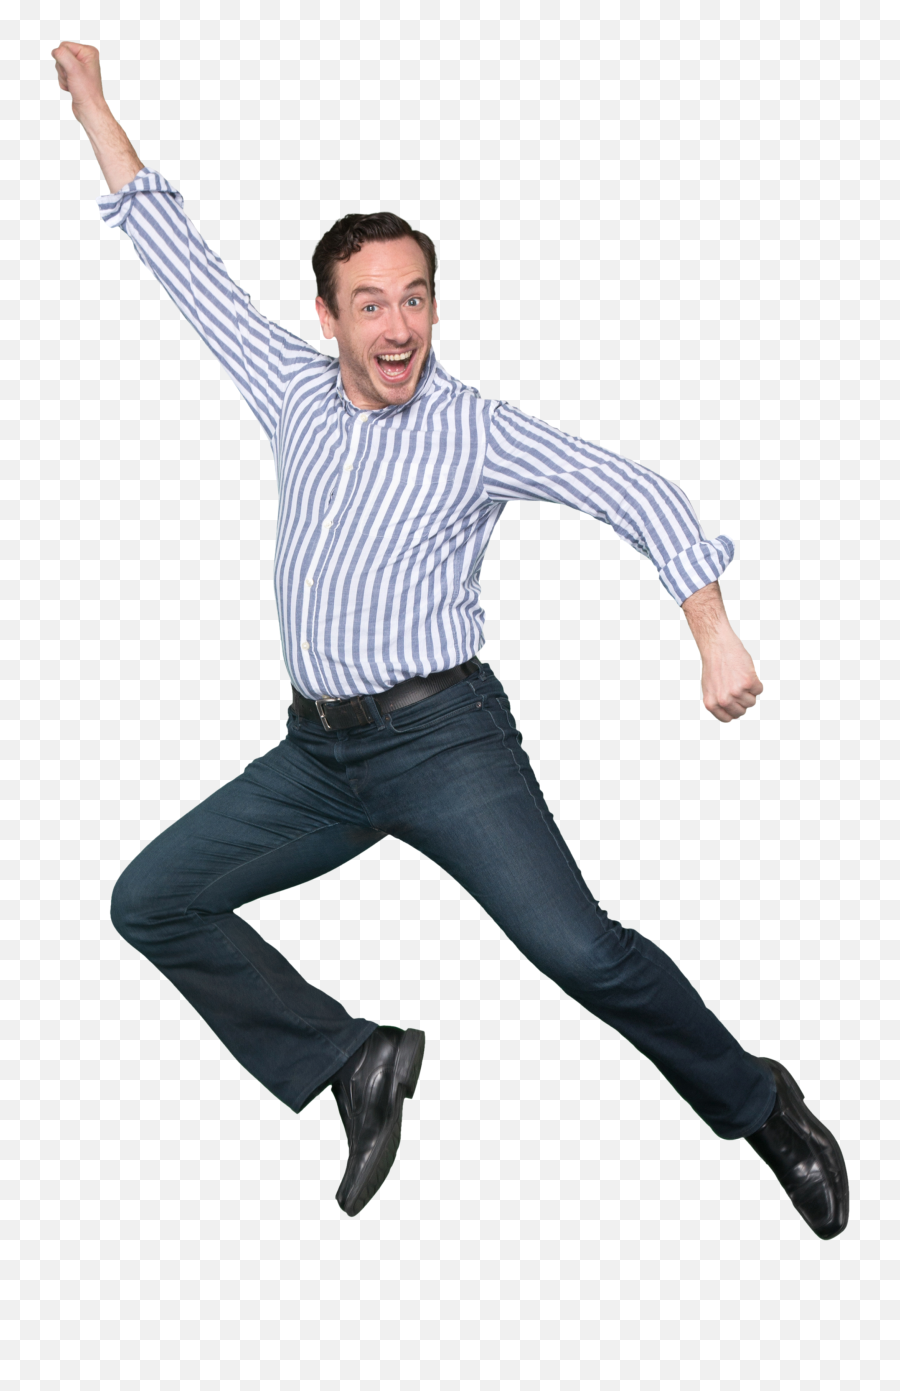 Jumping Person Png - Robbie Eicher Jumping 1741605 Vippng Smart Casual,Jumping Person Icon